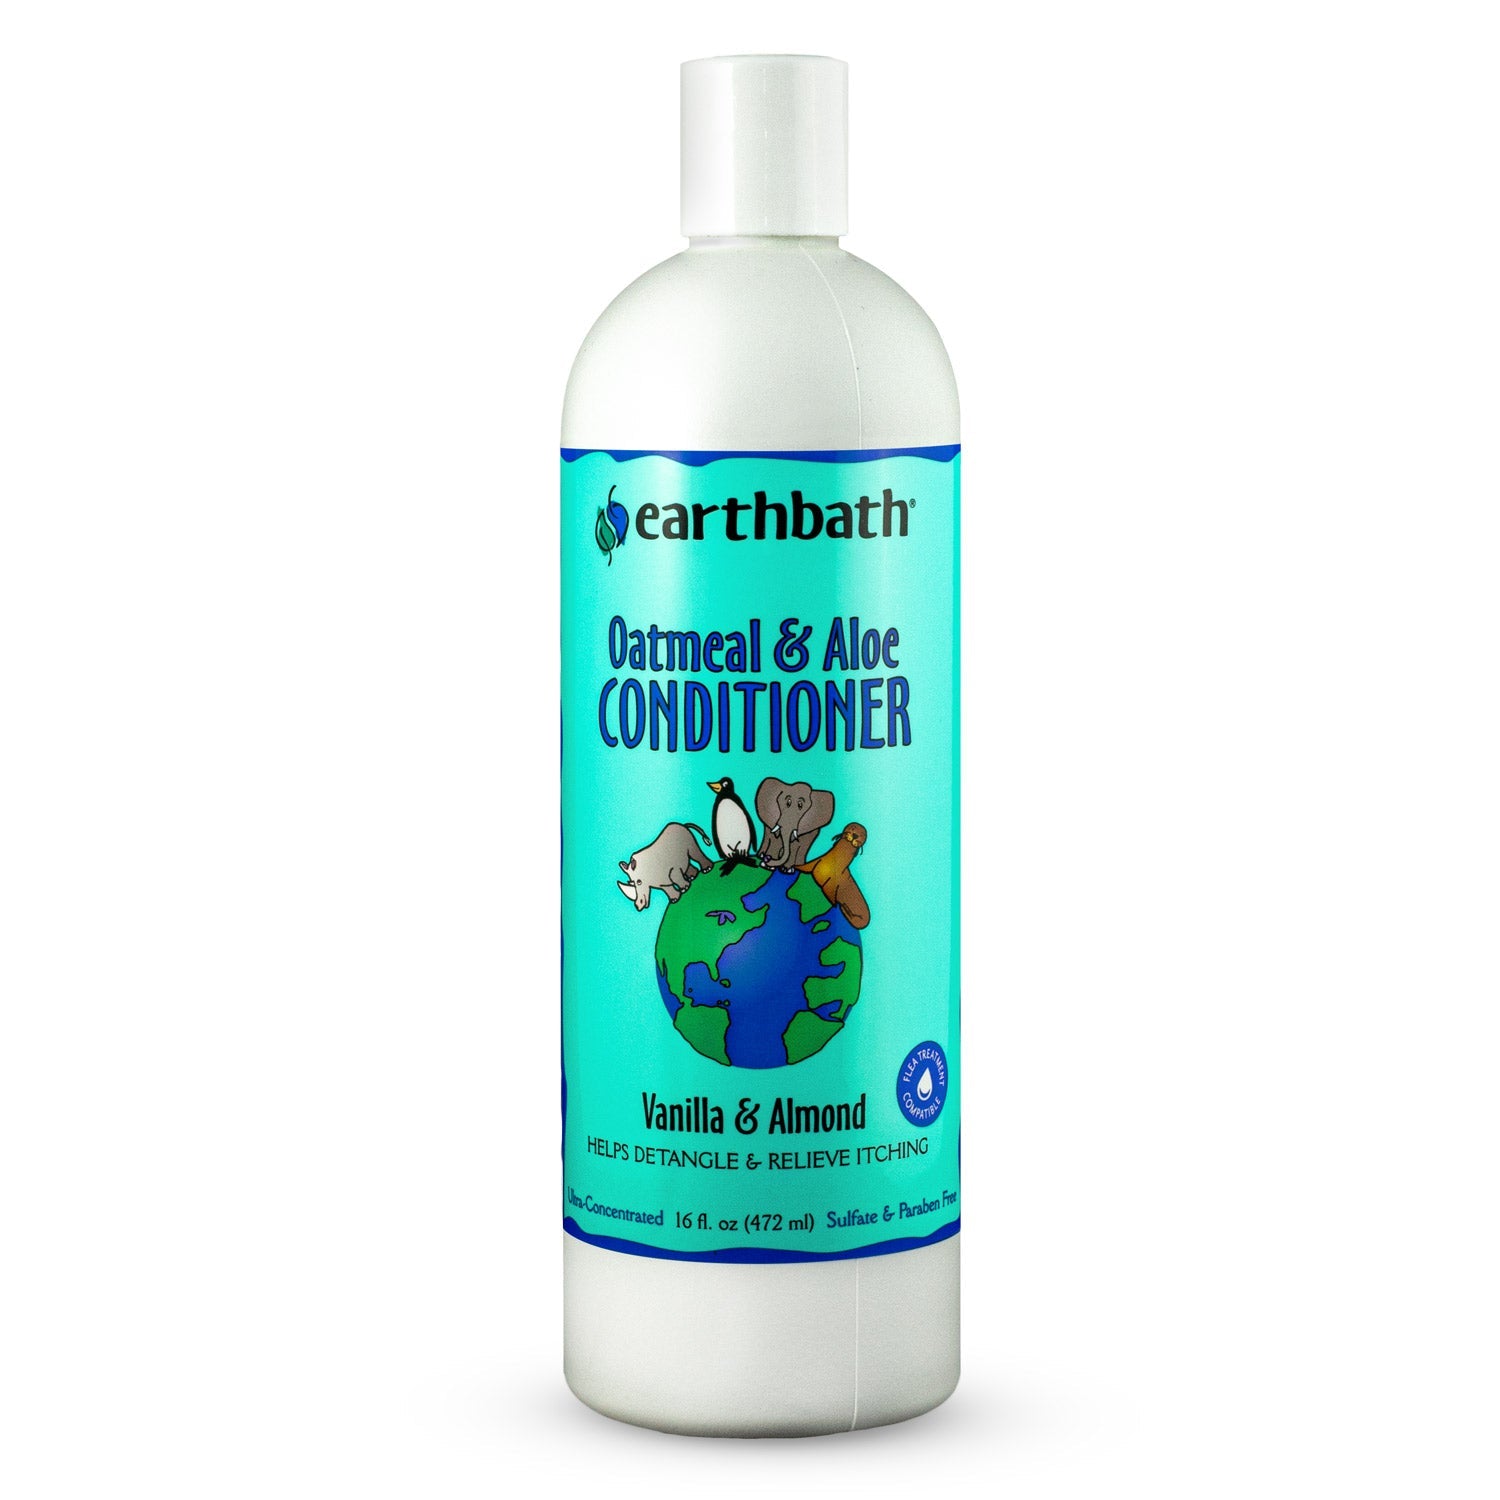 earthbath® Oatmeal & Aloe Conditioner, Vanilla & Almond, Helps Relieve Itchy Dry Skin